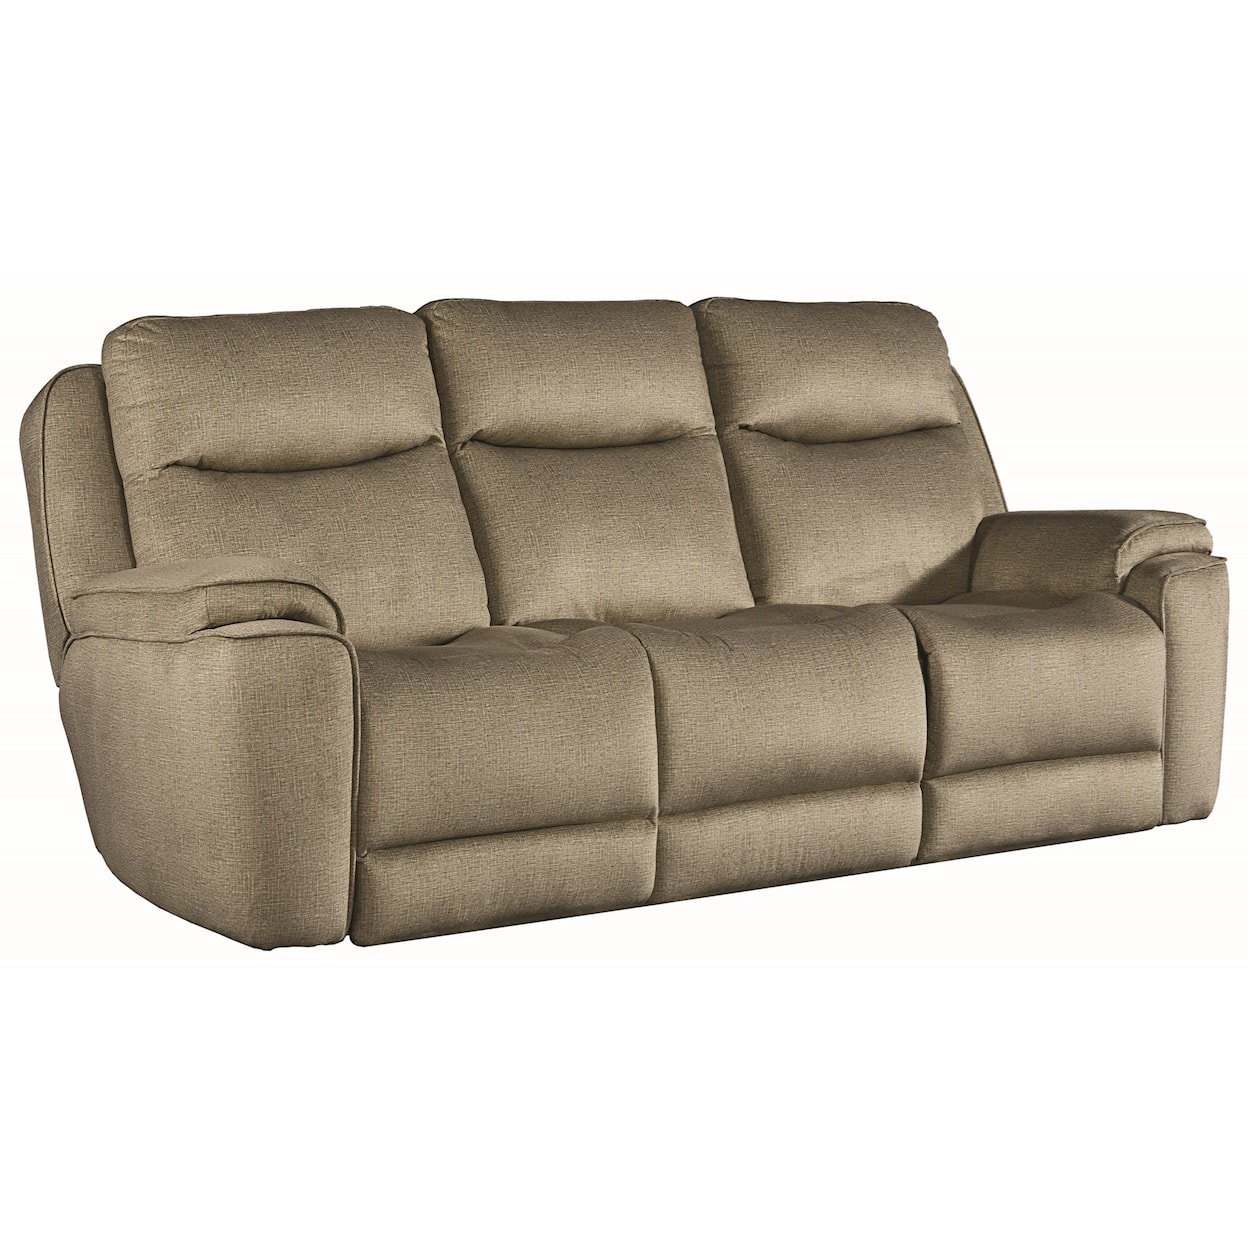 Southern Motion Show Stopper Power Reclining Sofa